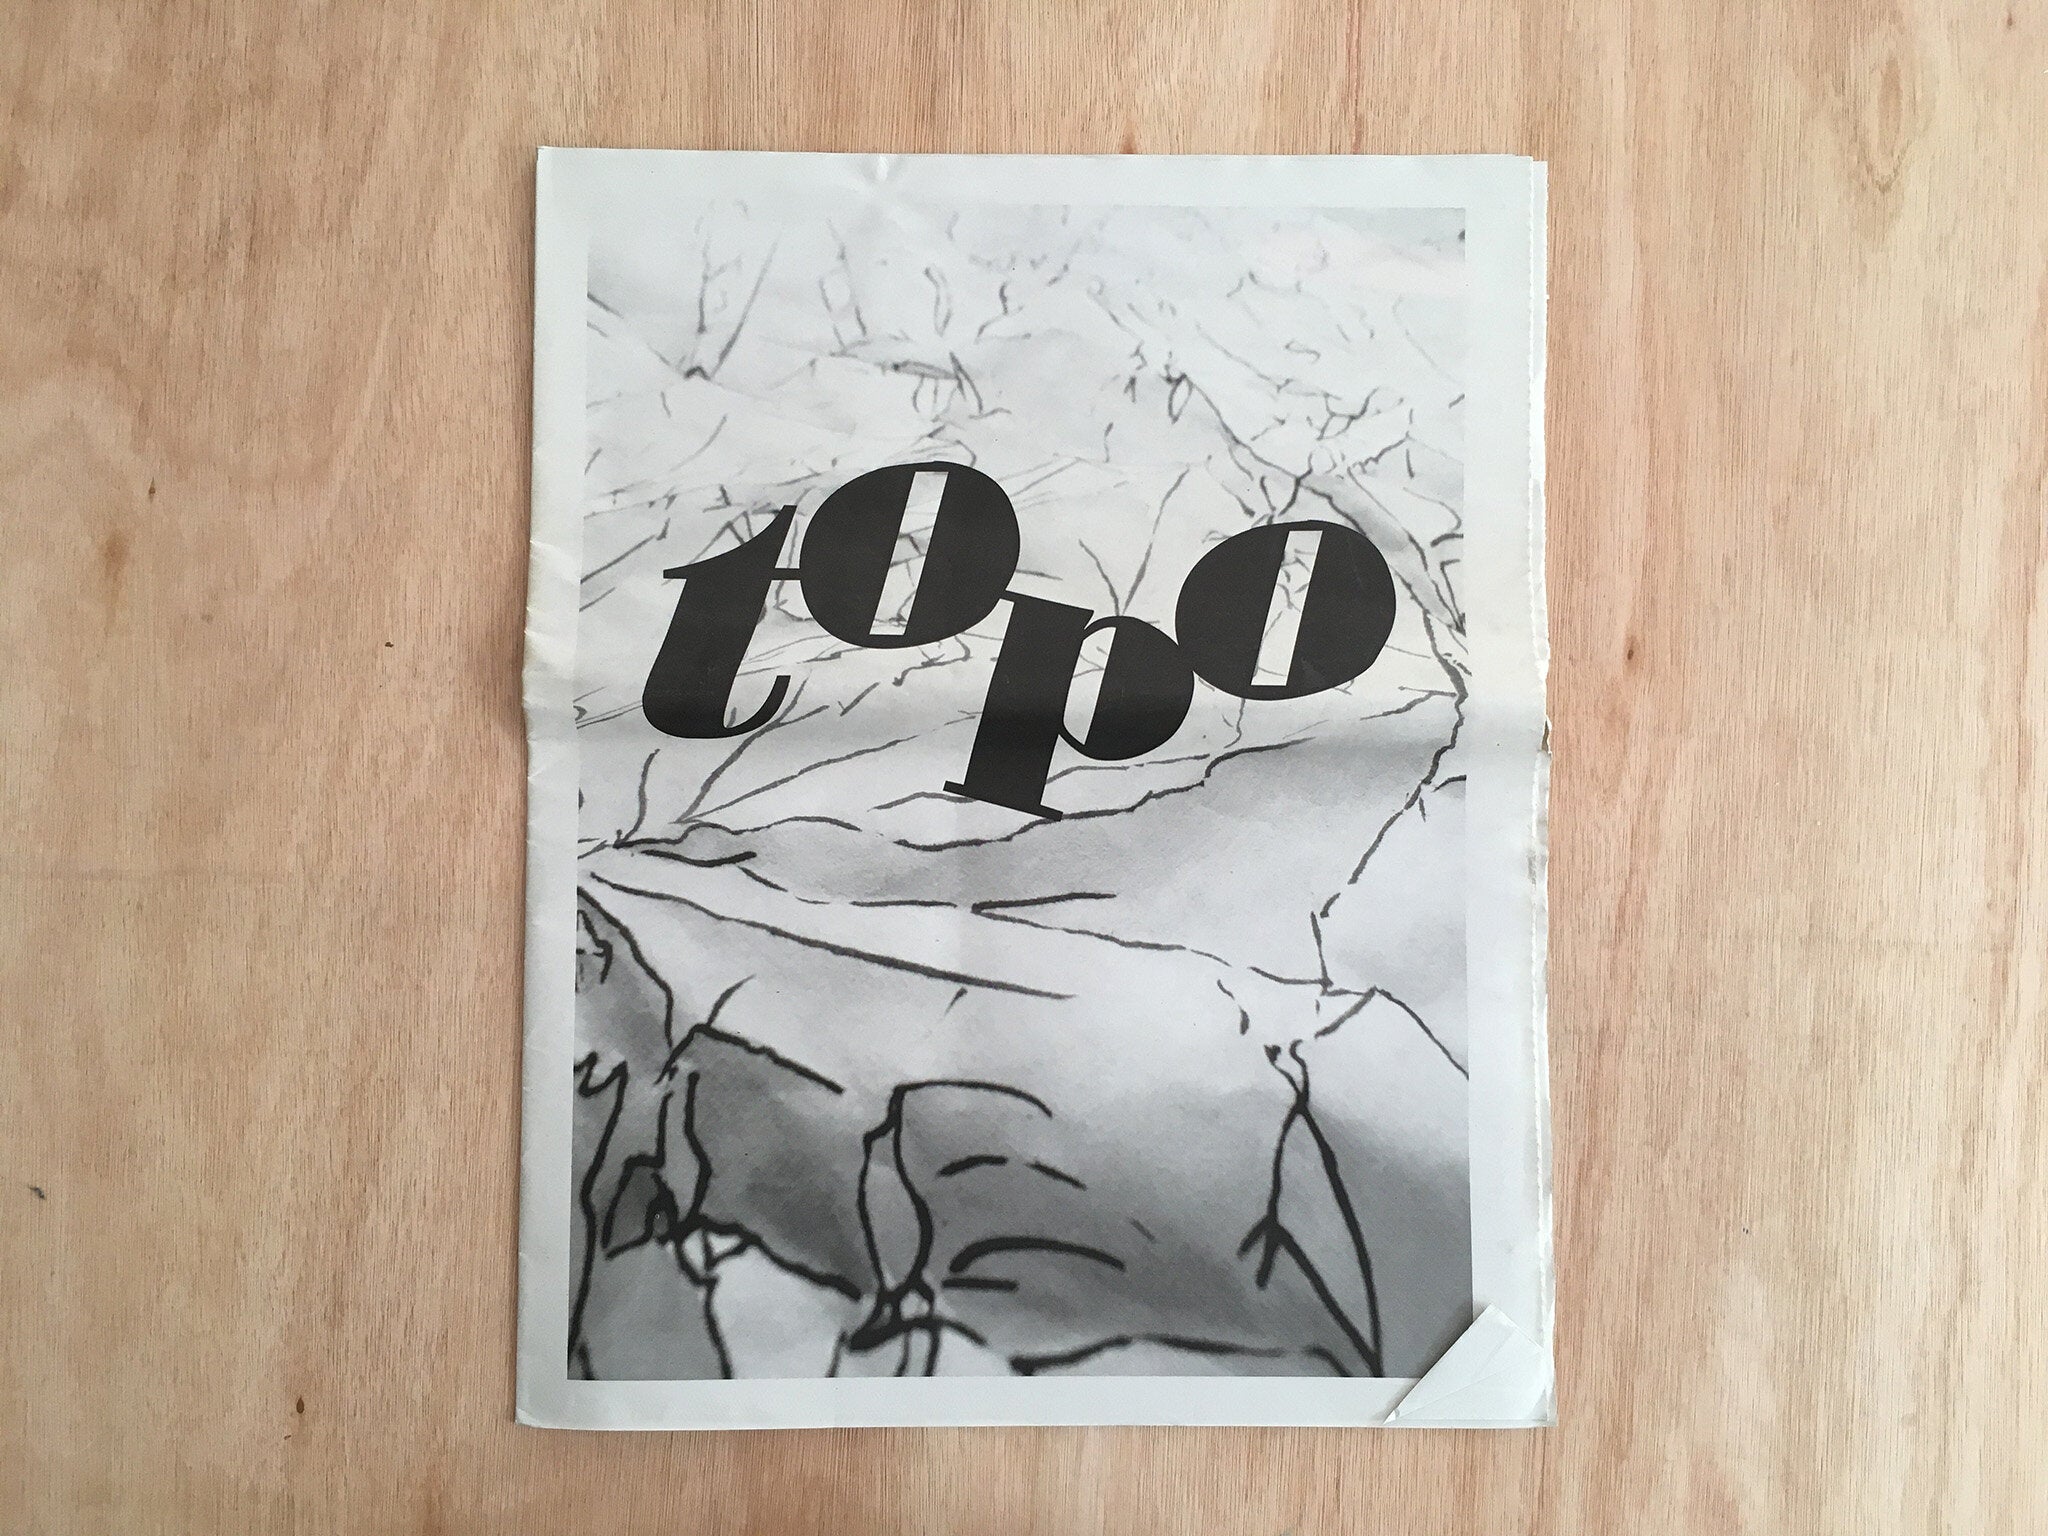 TOPO by Scott Rogers and Mason Leaver-Yap